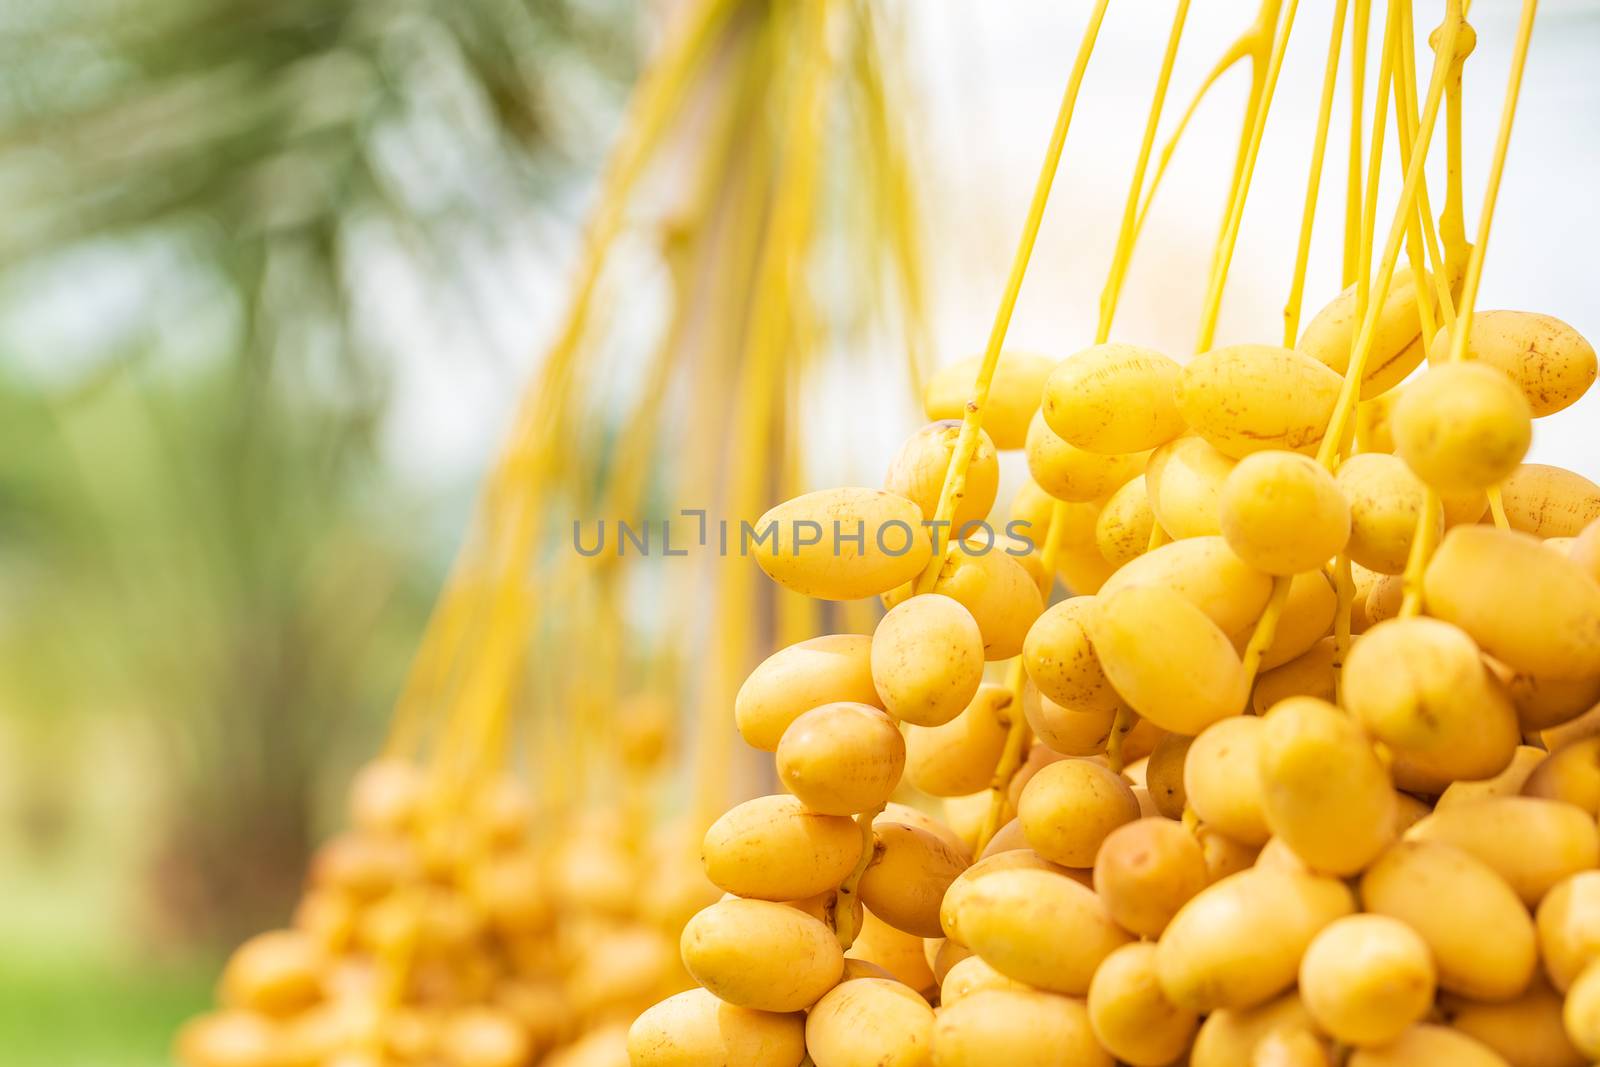 Dates palm branches with ripe dates